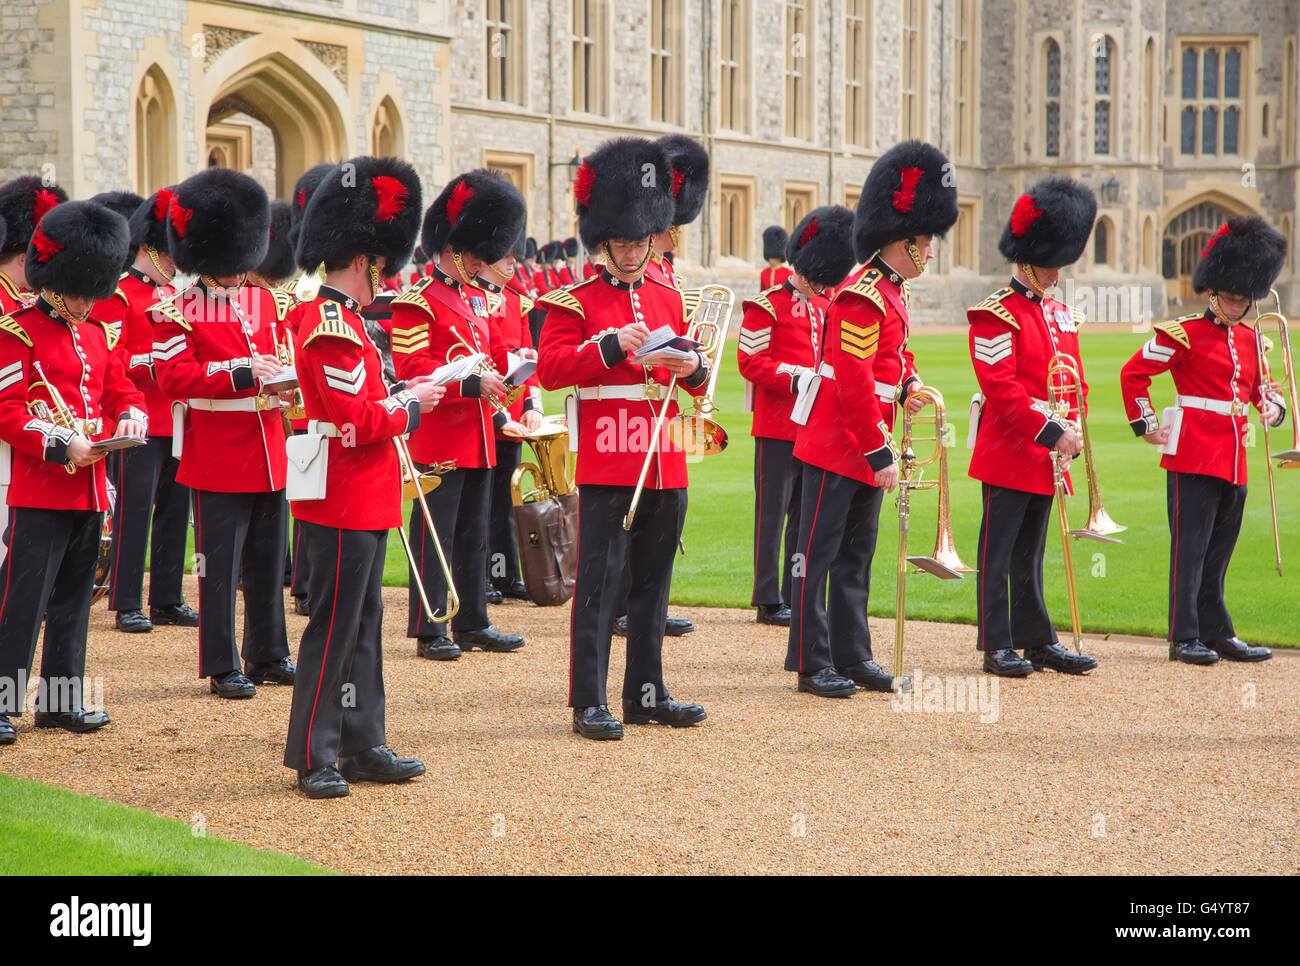 WINDSOR - APRIL 16: Unidentified men members of the royal guard during change ceremony on April 16, 2016 in Windsor, United King Stock Photo